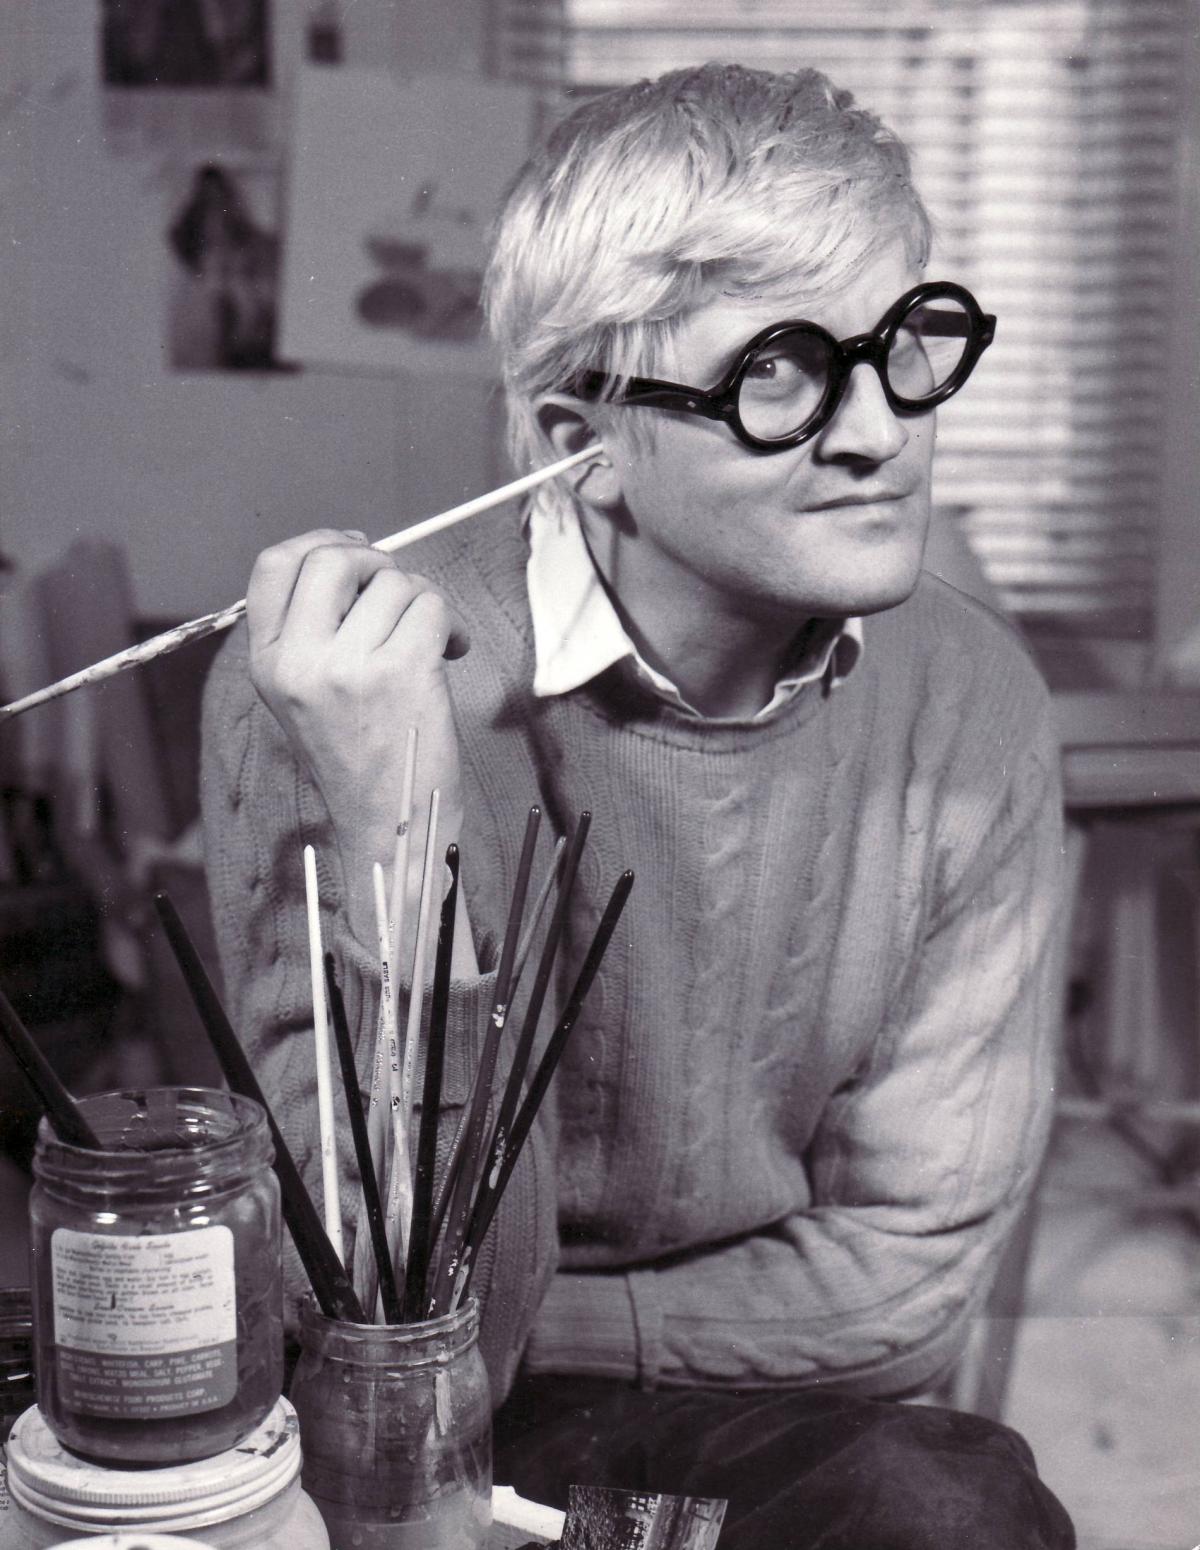 A portrait of David Hockney from the mid 1970s